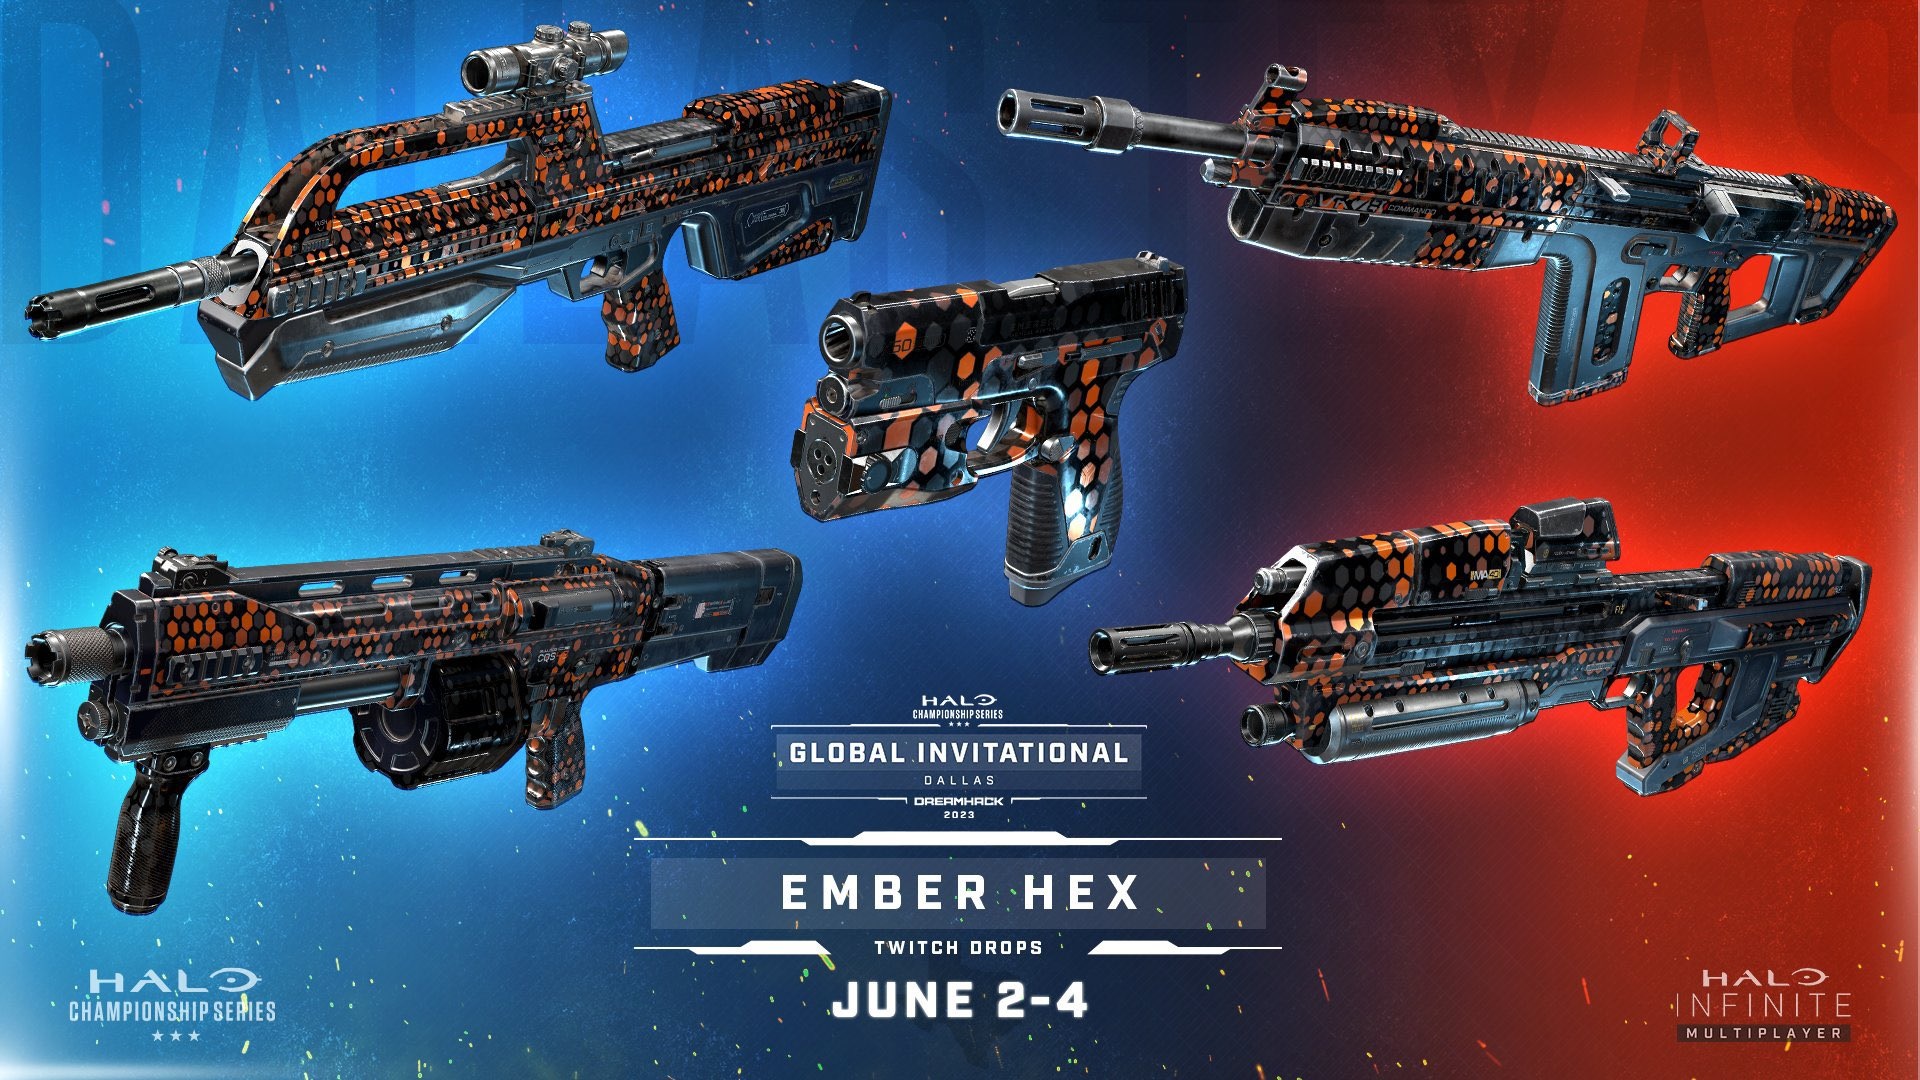 Halo Infinite image of the Ember Hex weapon coating